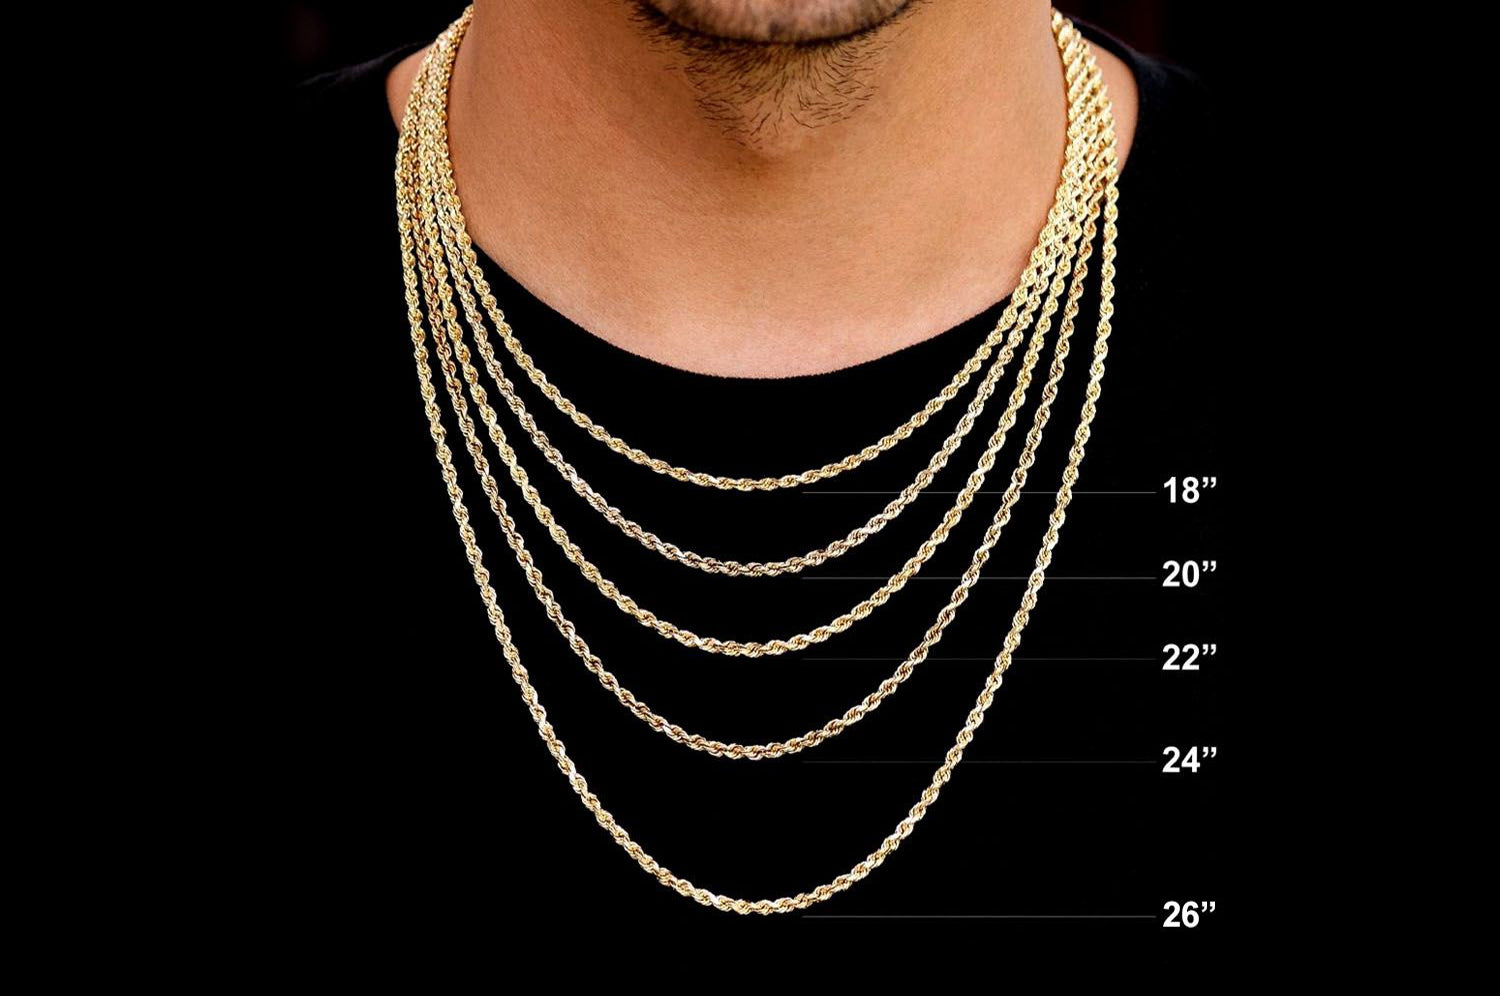 14k Tri-Color Gold 5mm Rope Chain 22 Inches